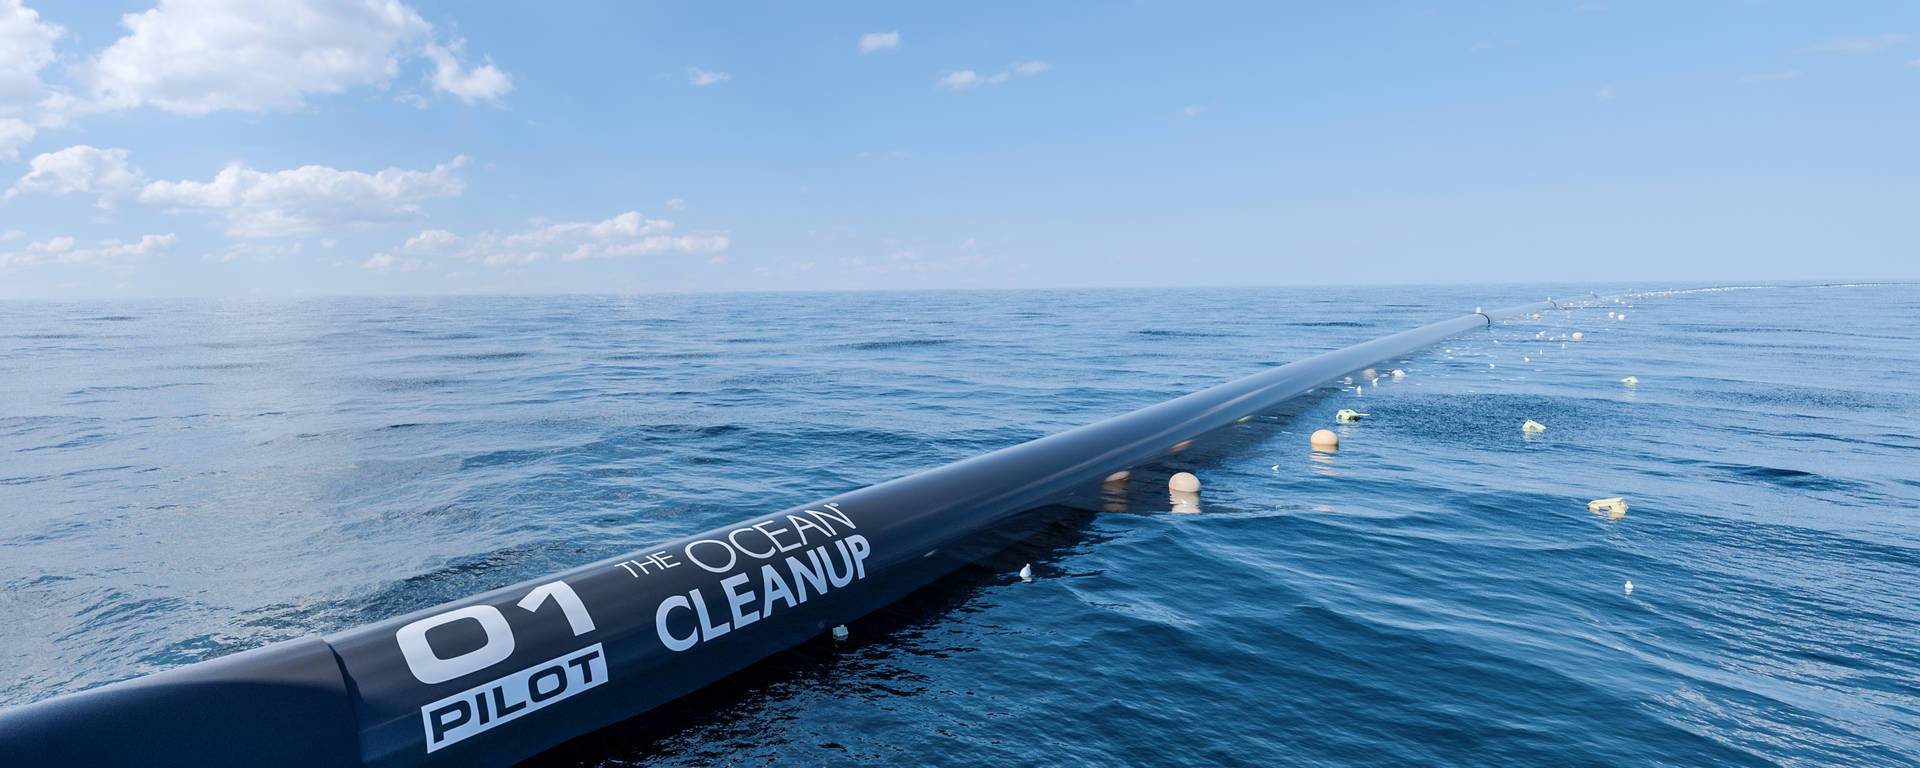 Geek insider, geekinsider, geekinsider. Com,, a giant, floating trash can is going to clean up our oceans, news